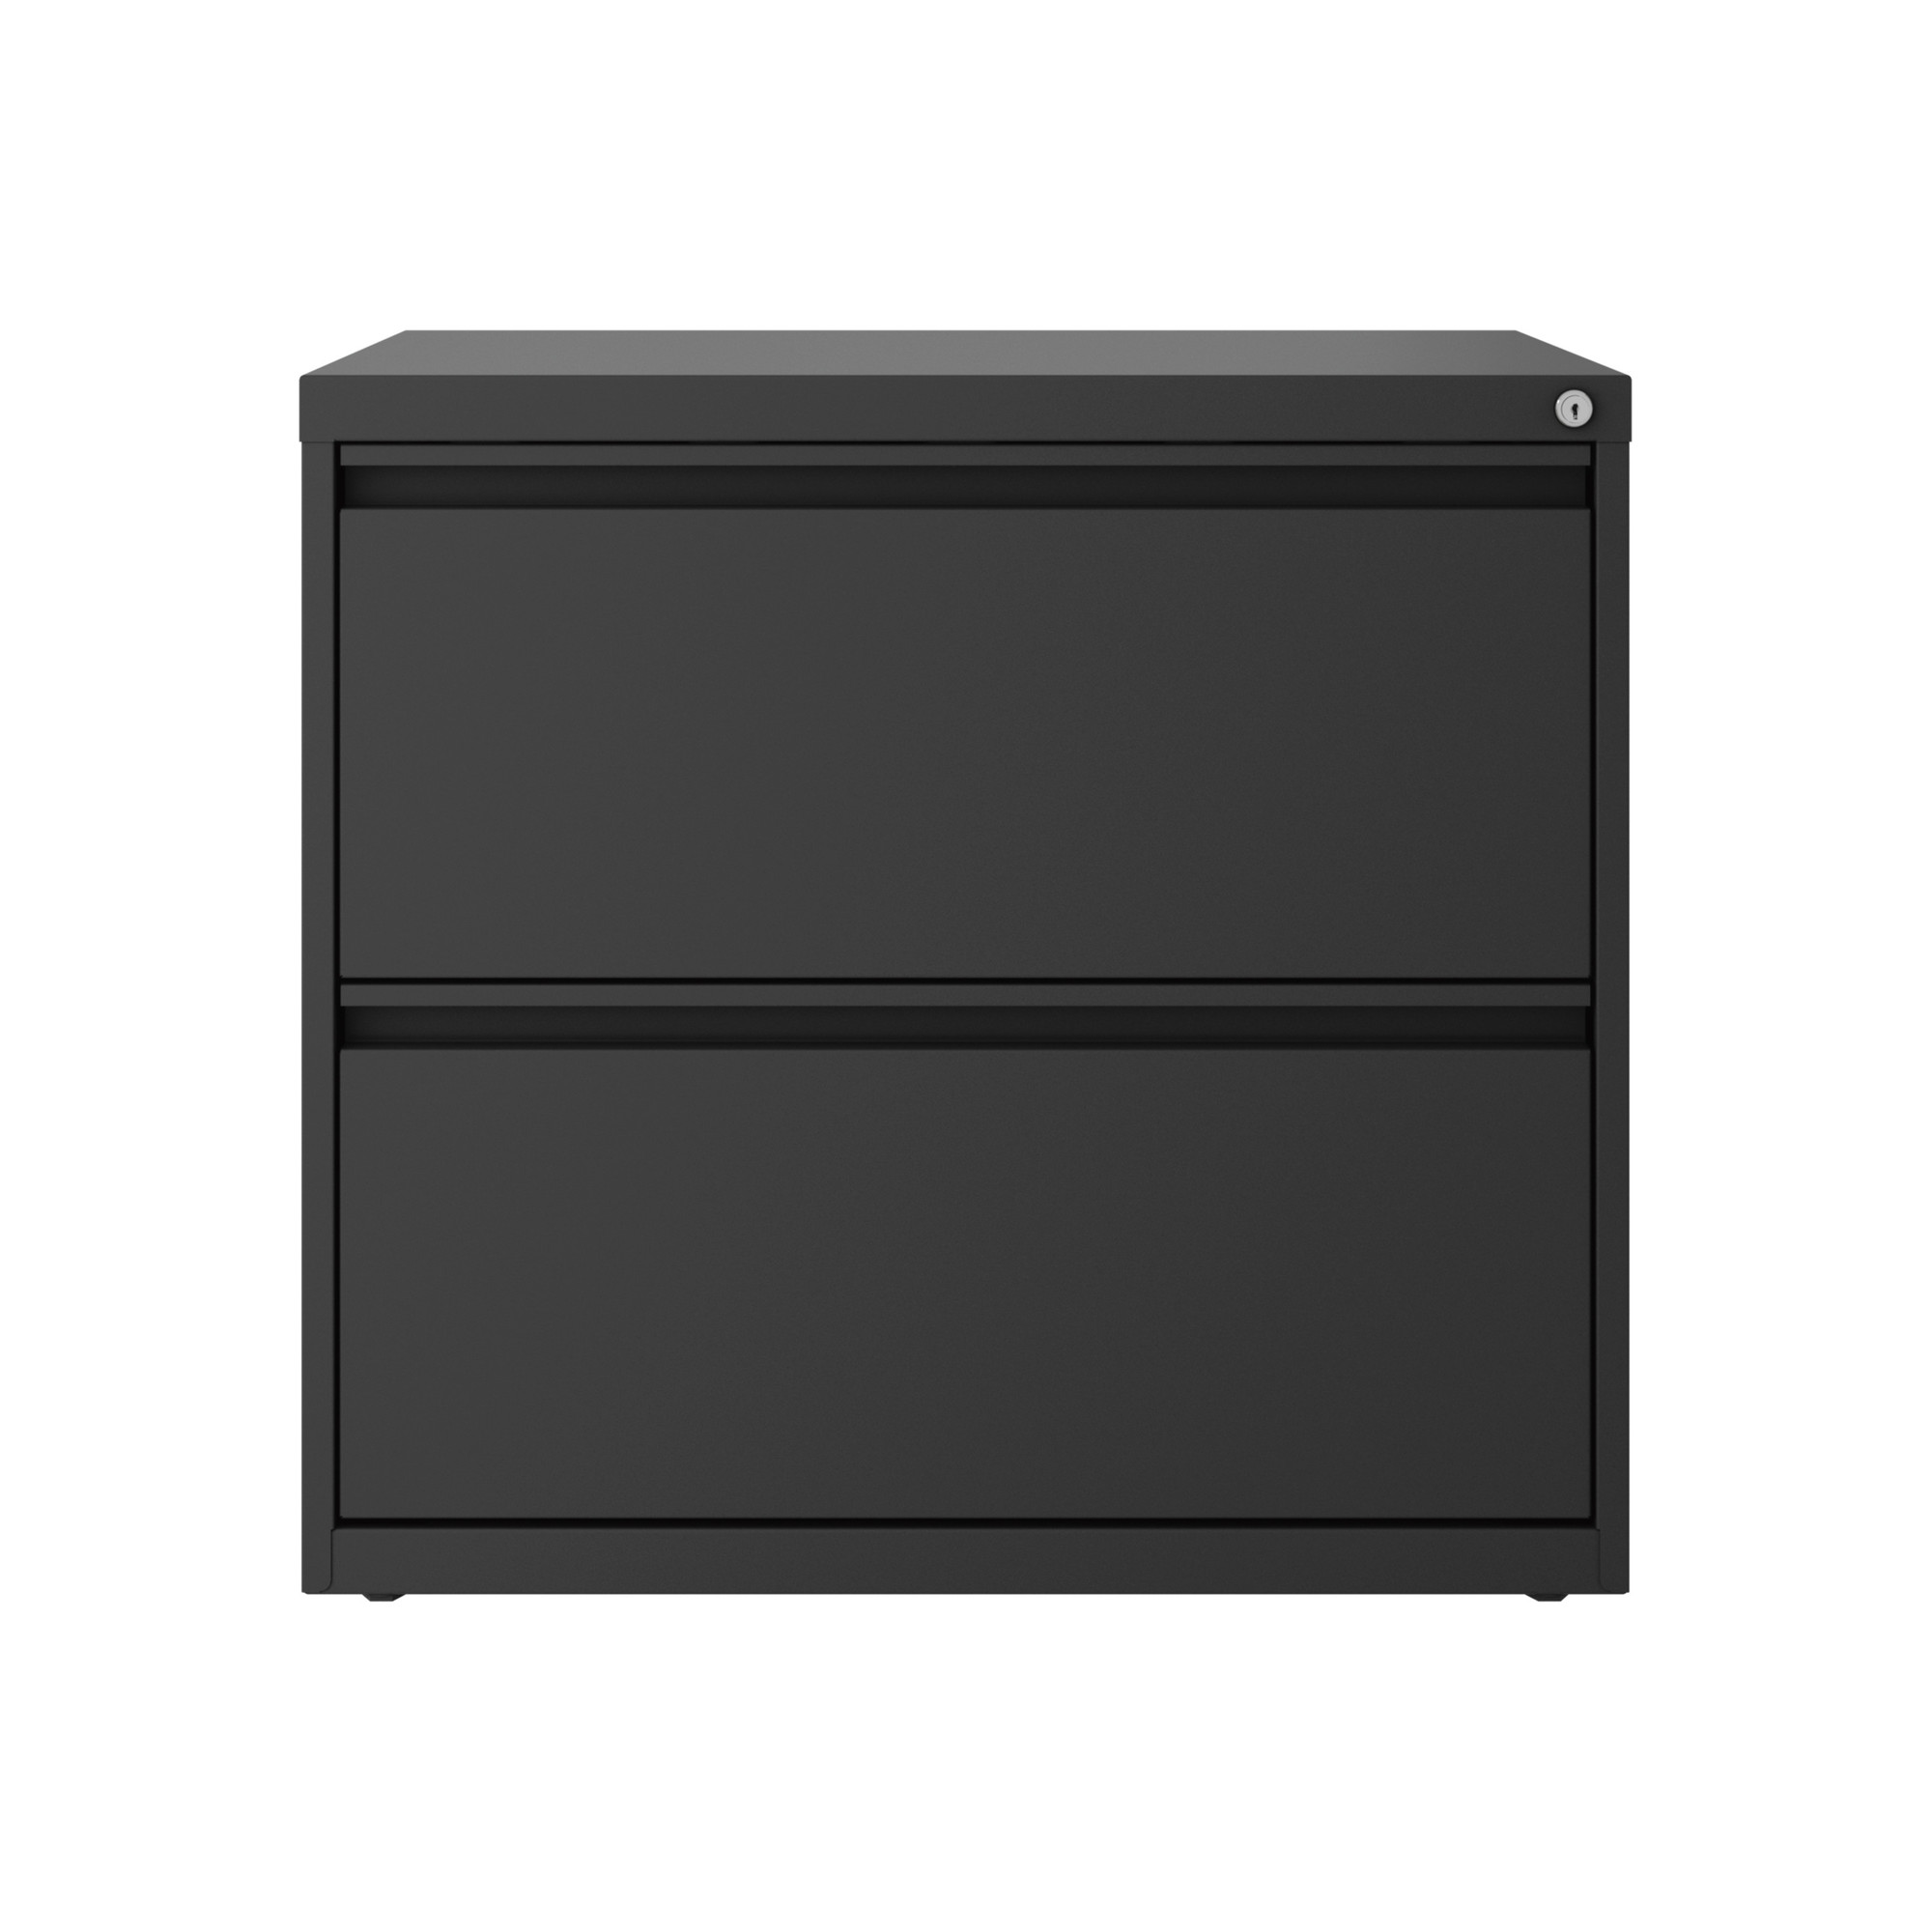 Hirsh Industries, 2 Drawer Lateral 101 File Cabinet, Width 30 in, Depth 17.63 in, Height 27.75 in, Model 24084